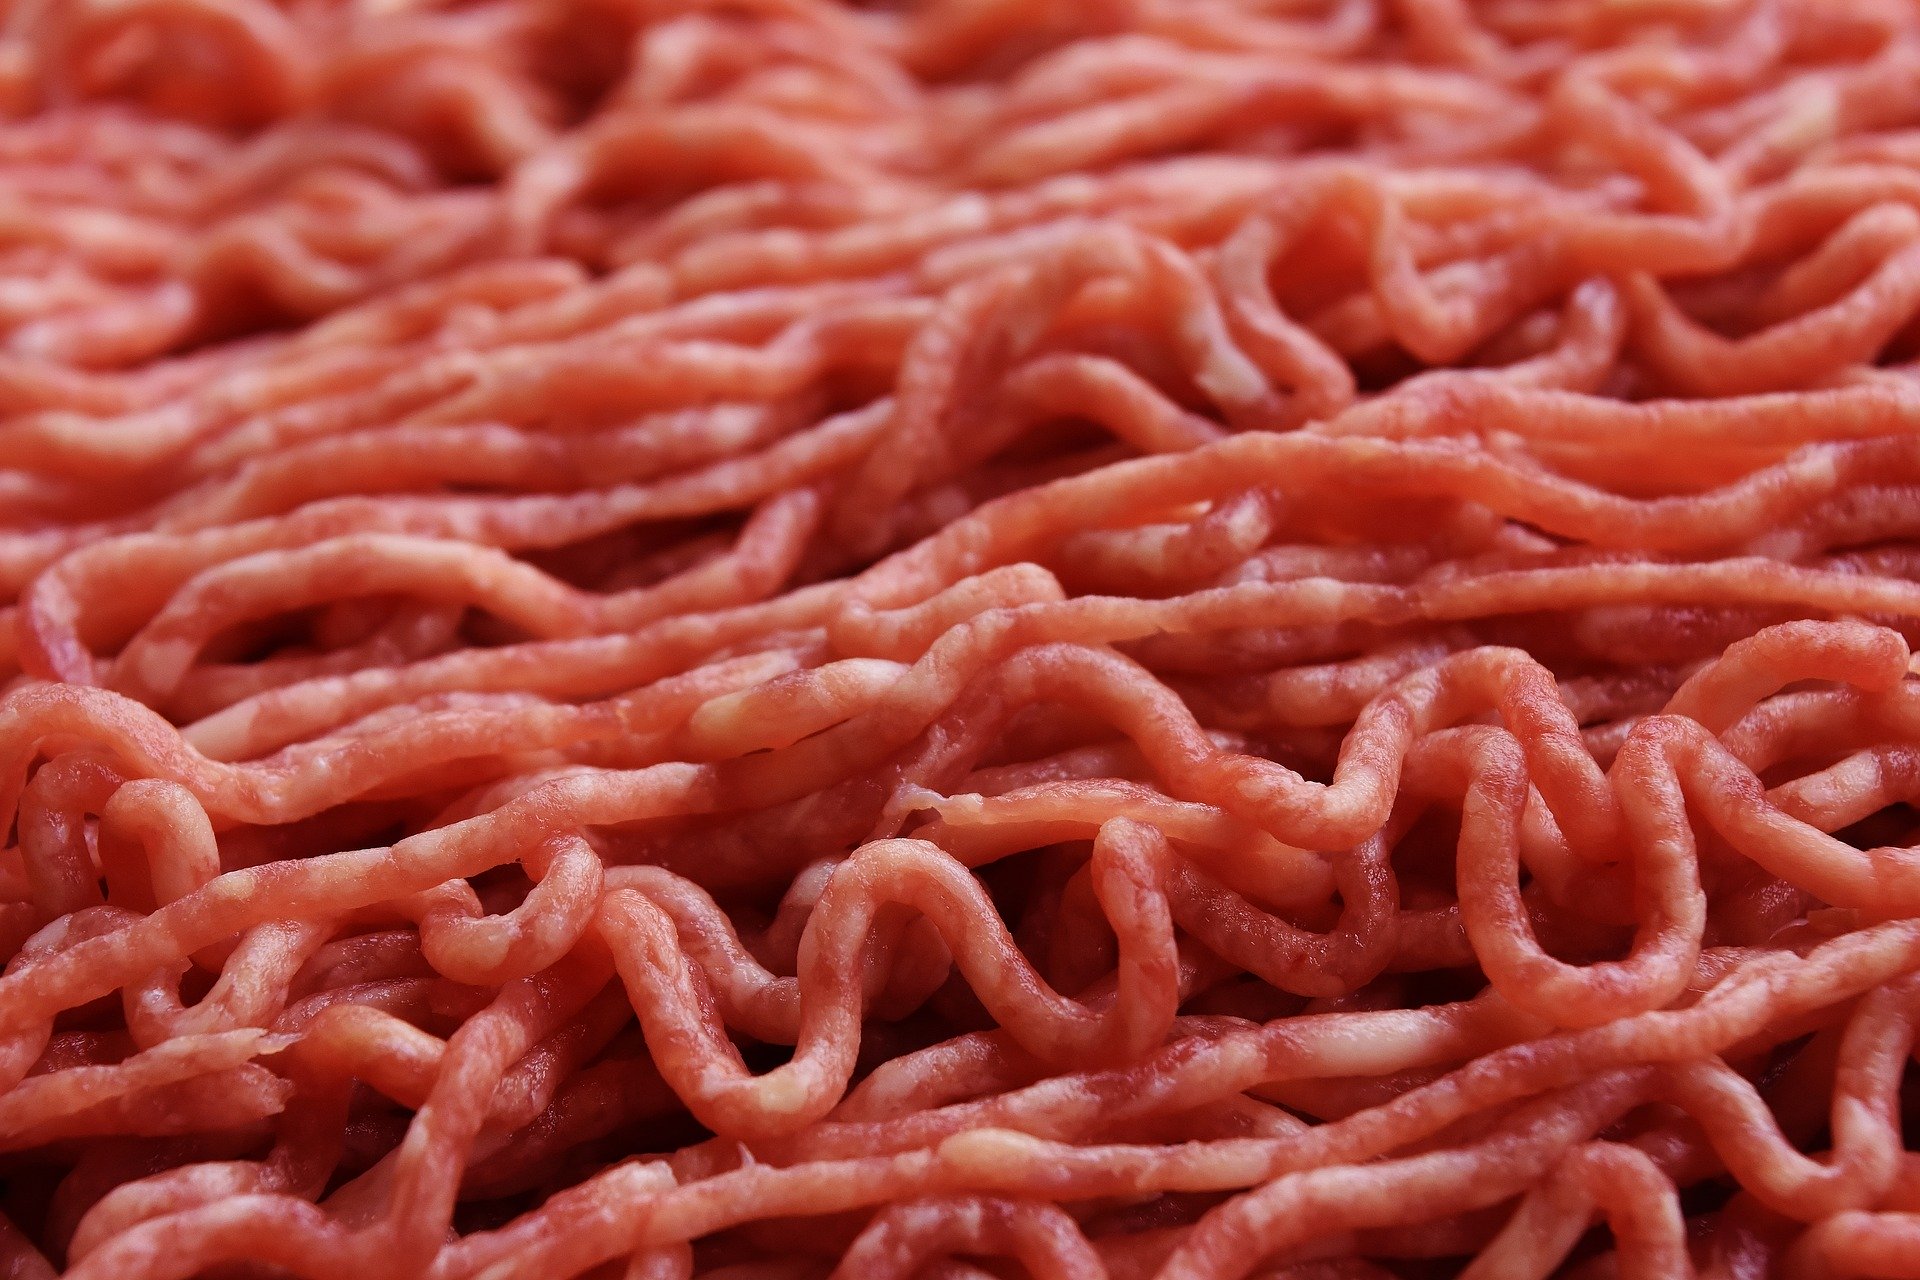 Lab grown meat is coming in the near future